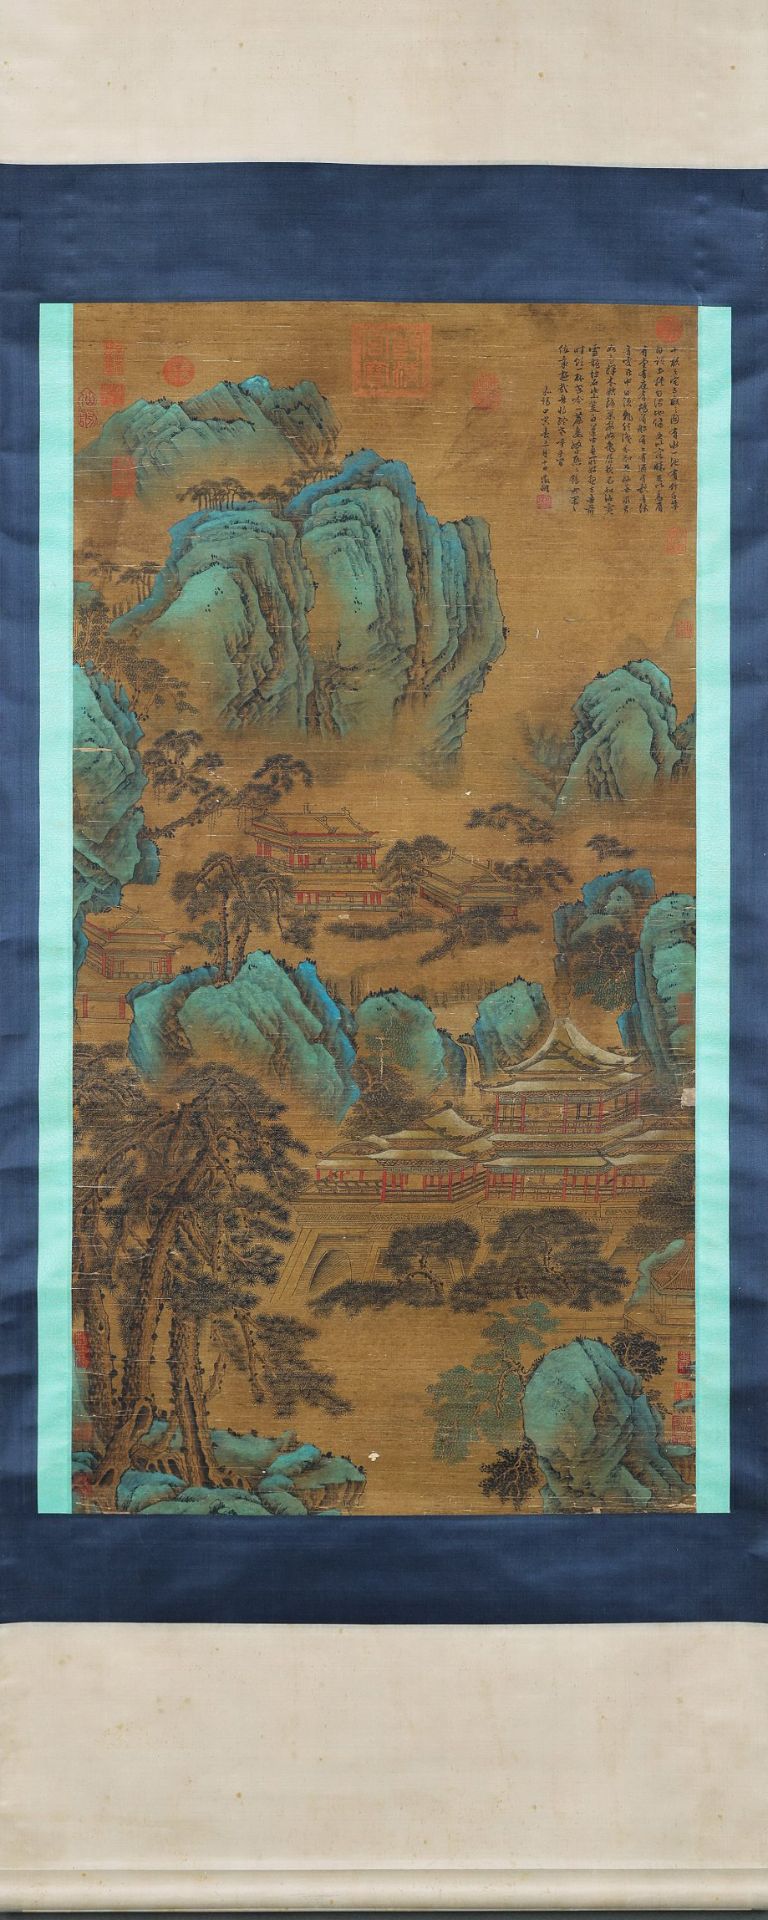 A Chinese Scroll Painting By Wen Zhengming - Image 9 of 13